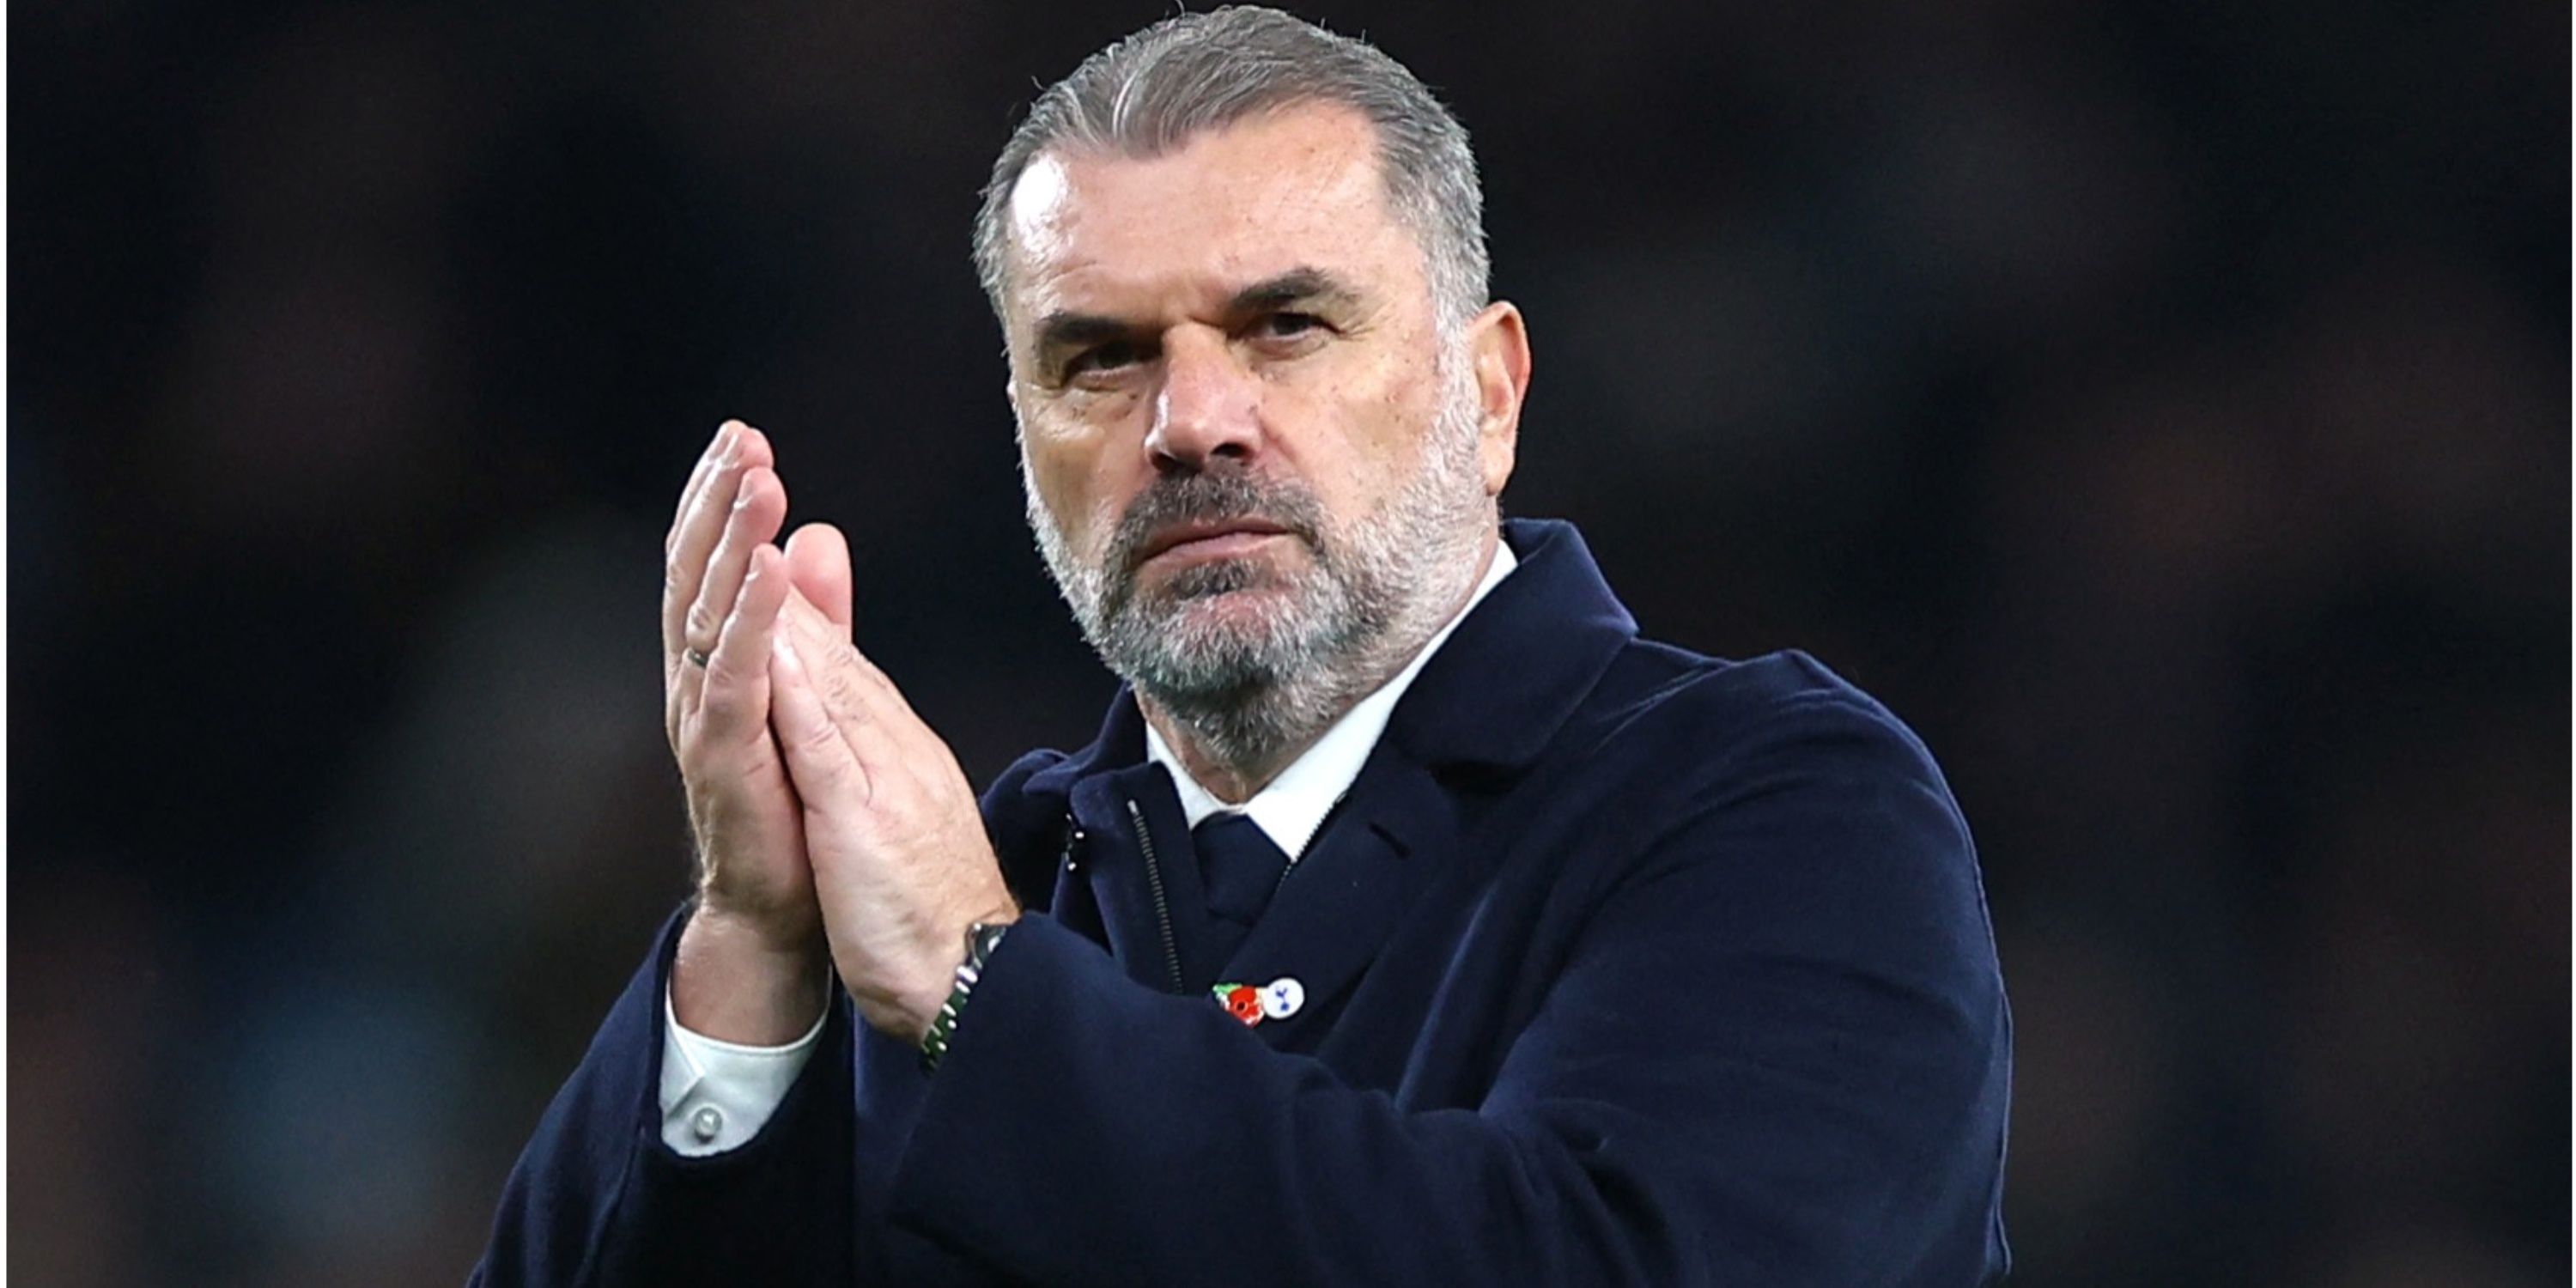 Ange Postecoglou's brilliant post-match interview goes viral after Tottenham 1-4 Chelsea 